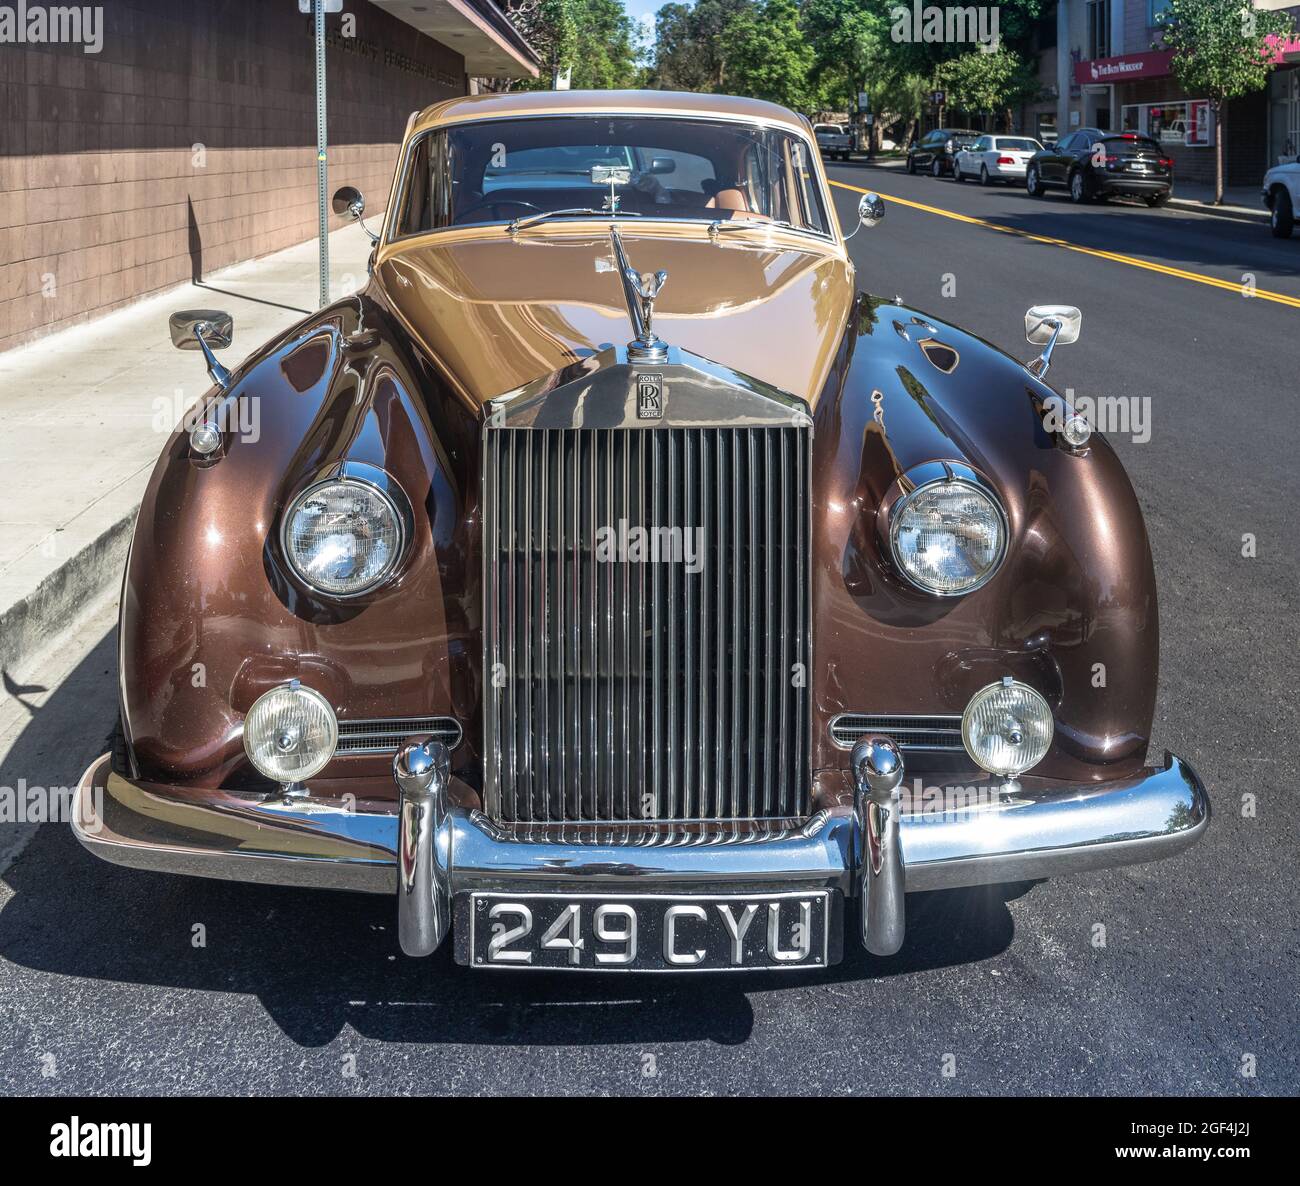 Claremont, USA - September 24, 2017: 1962 Rolls Royce Silver Cloud II, parked curbside on a Sunday afternoon in Claremont Village. Stock Photo